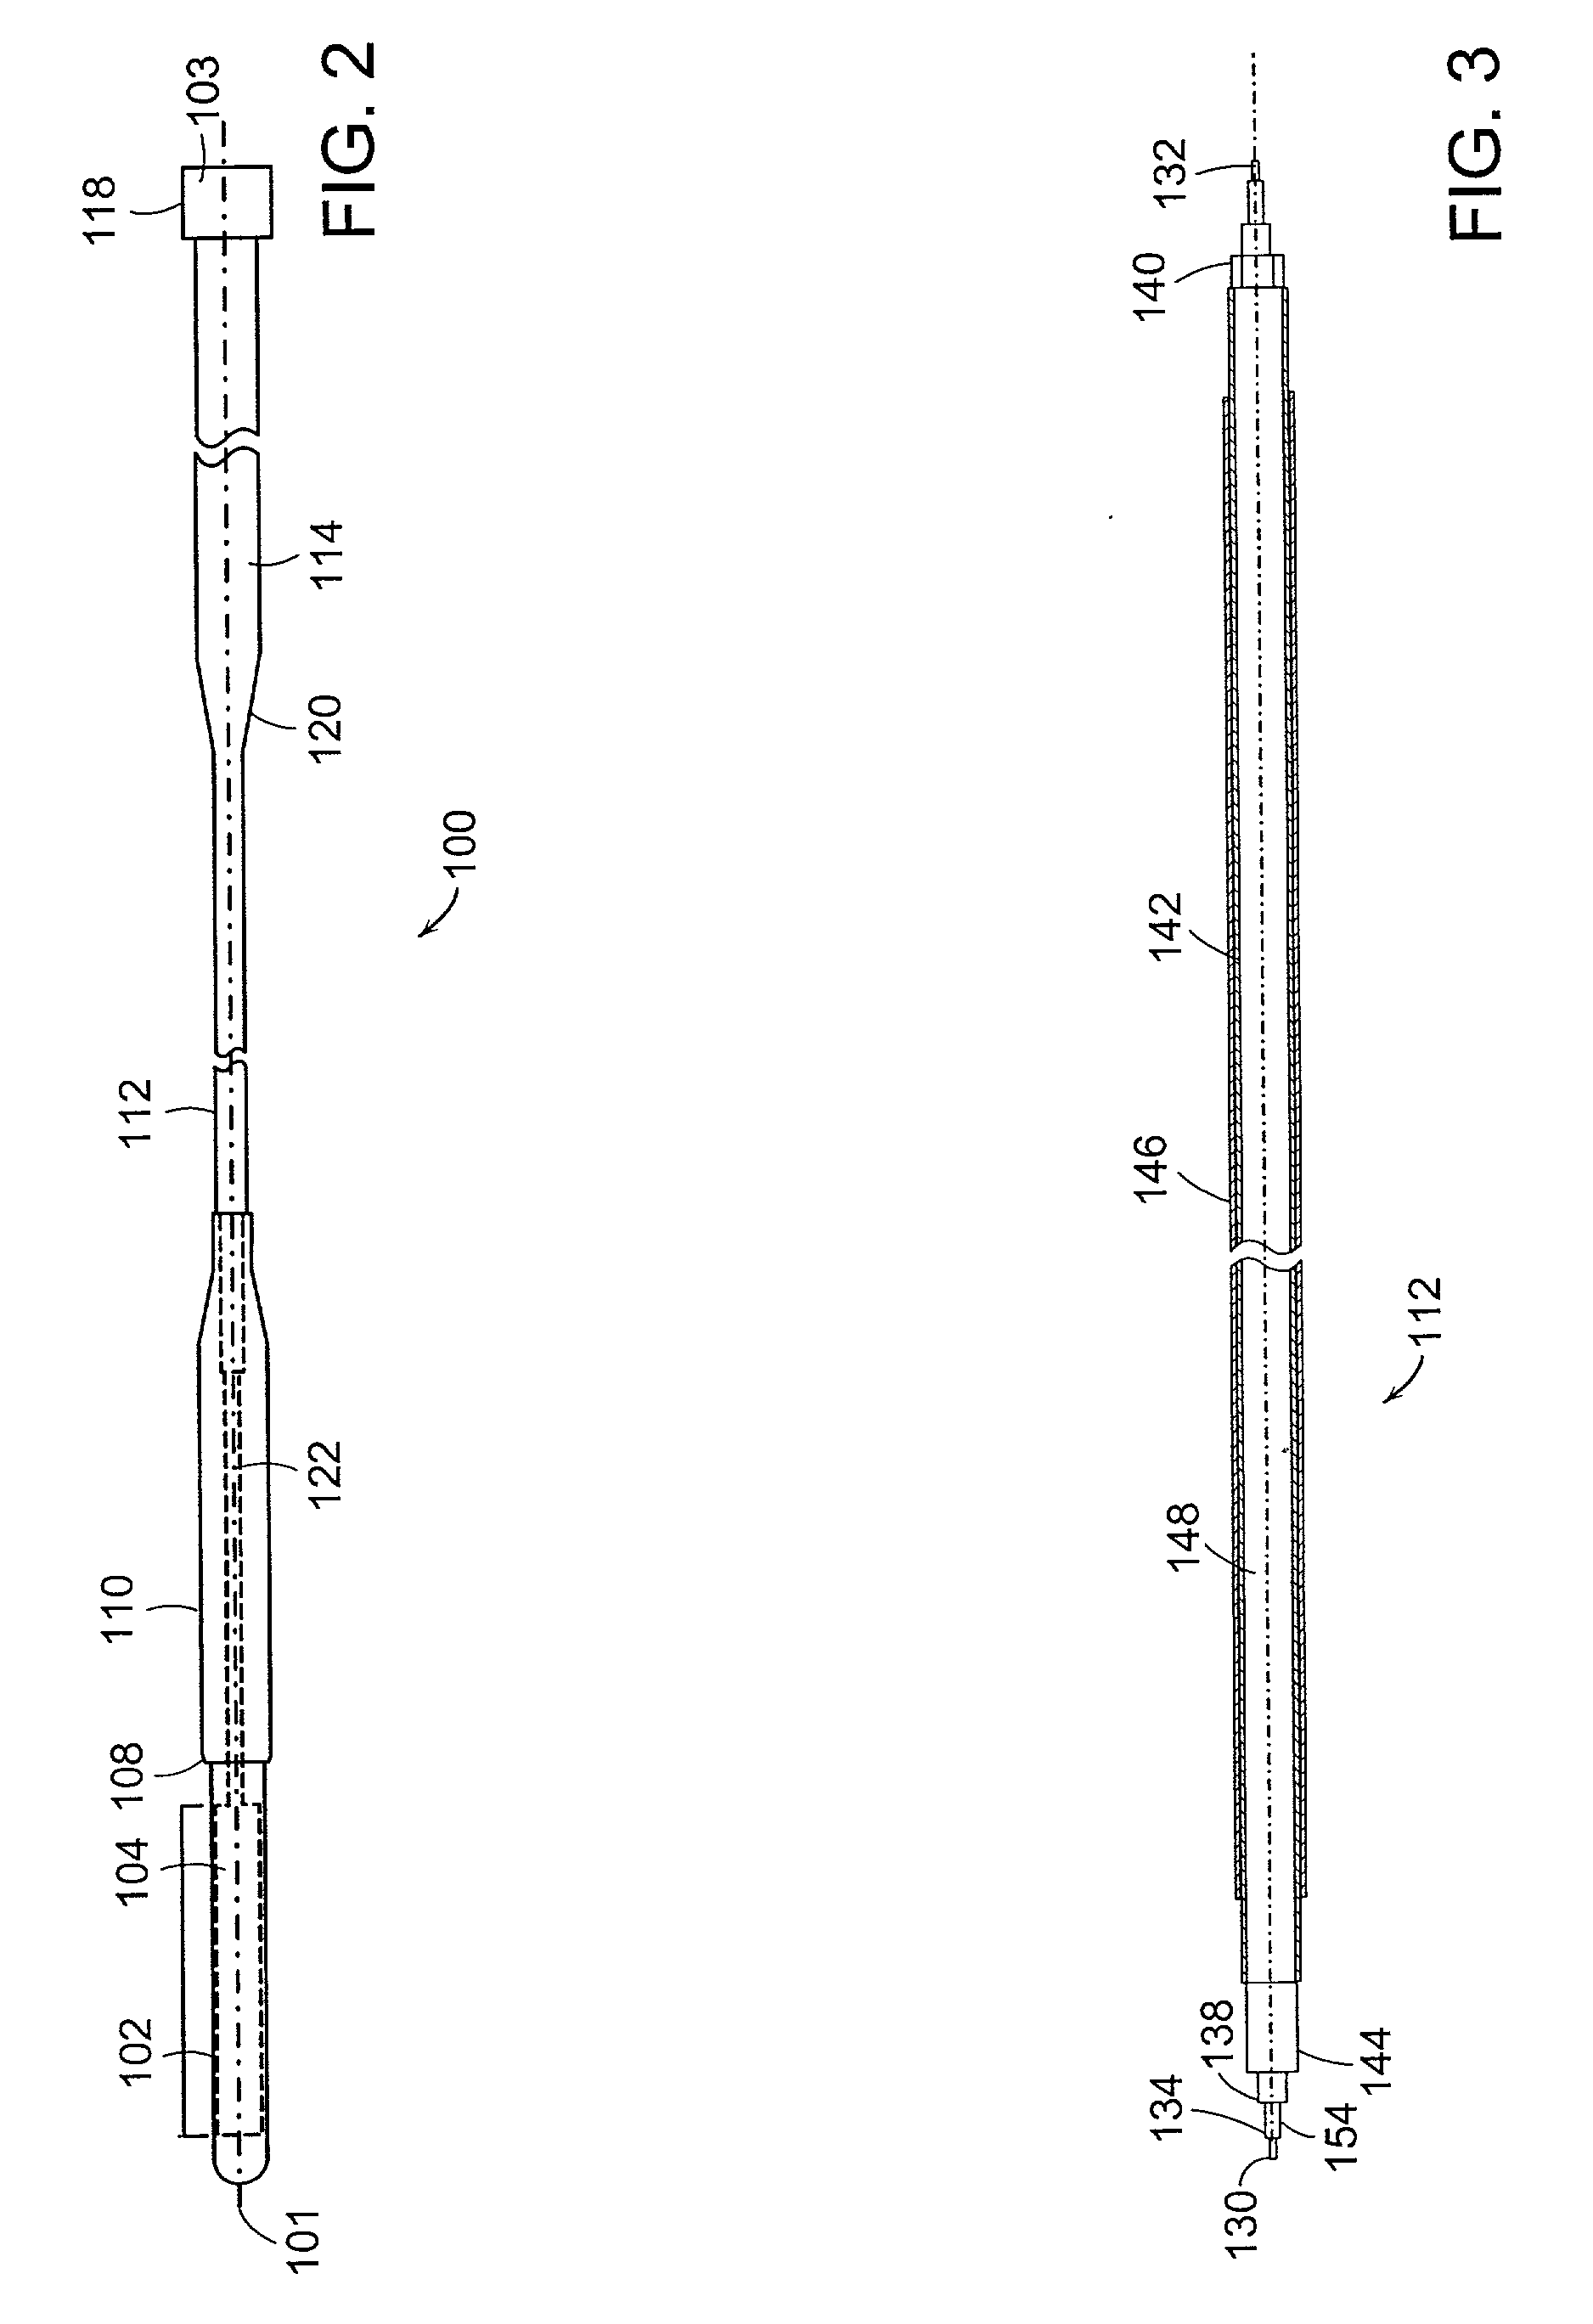 Systems and methods for evaluating the urethra and the periurethral tissues